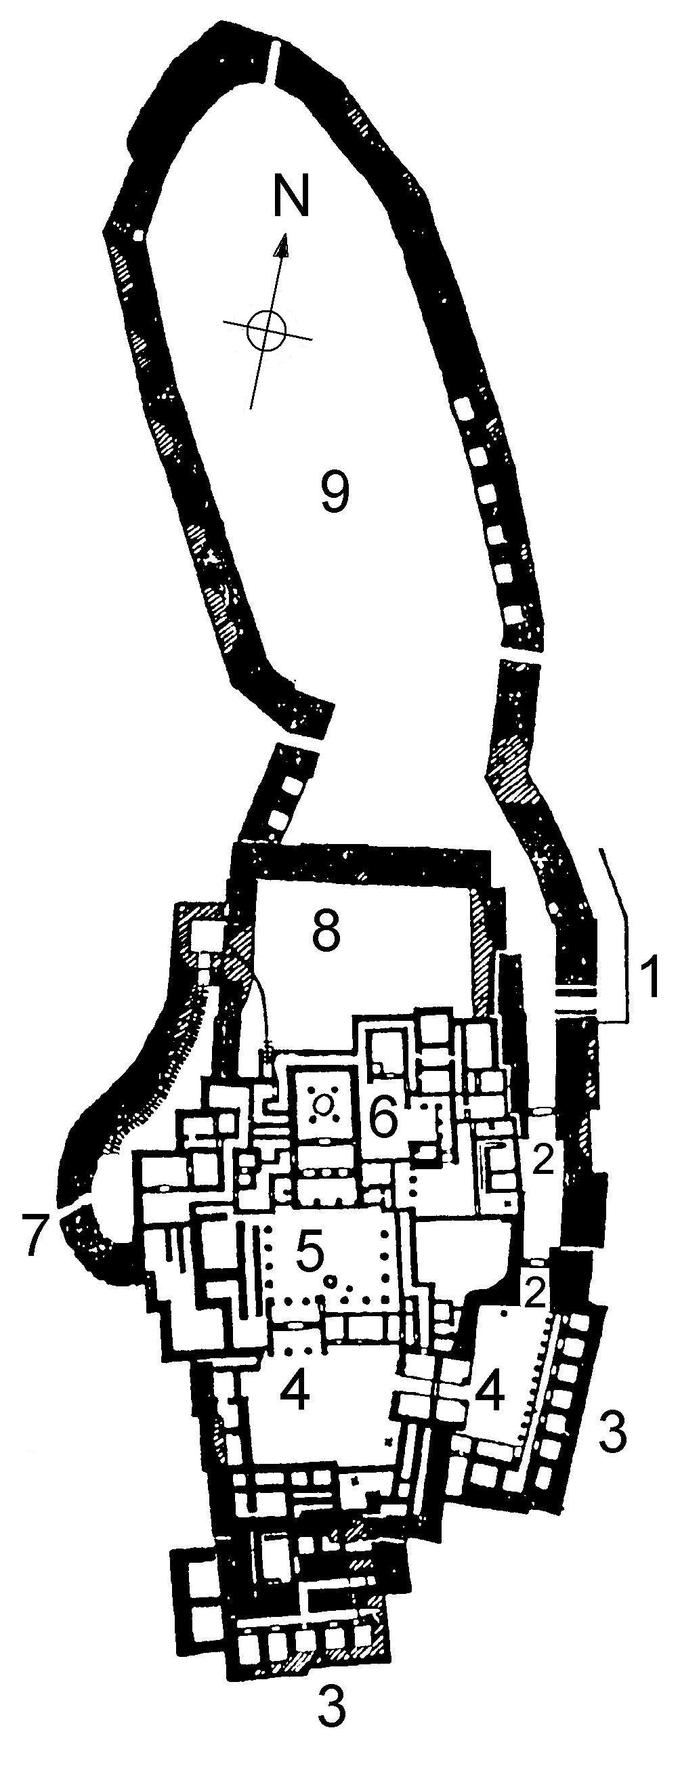 Drawing of the ground plan of the citadel of Tiryns, circa 1400–1200 BCE, in Tiryns, Greece.